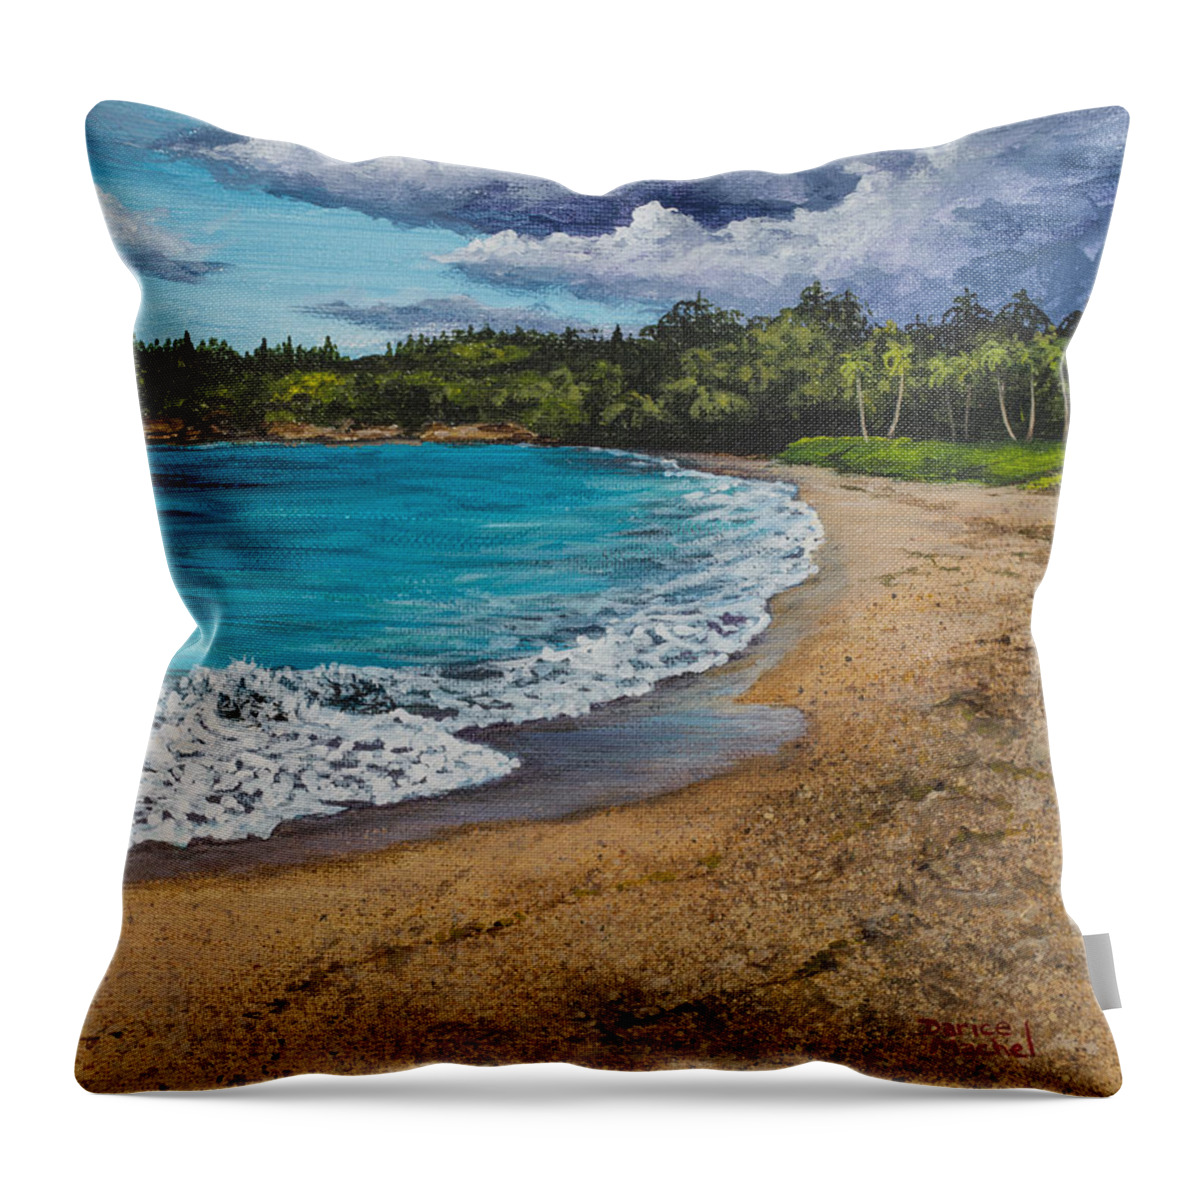 Landscape Throw Pillow featuring the painting Fleming Beach Maui by Darice Machel McGuire